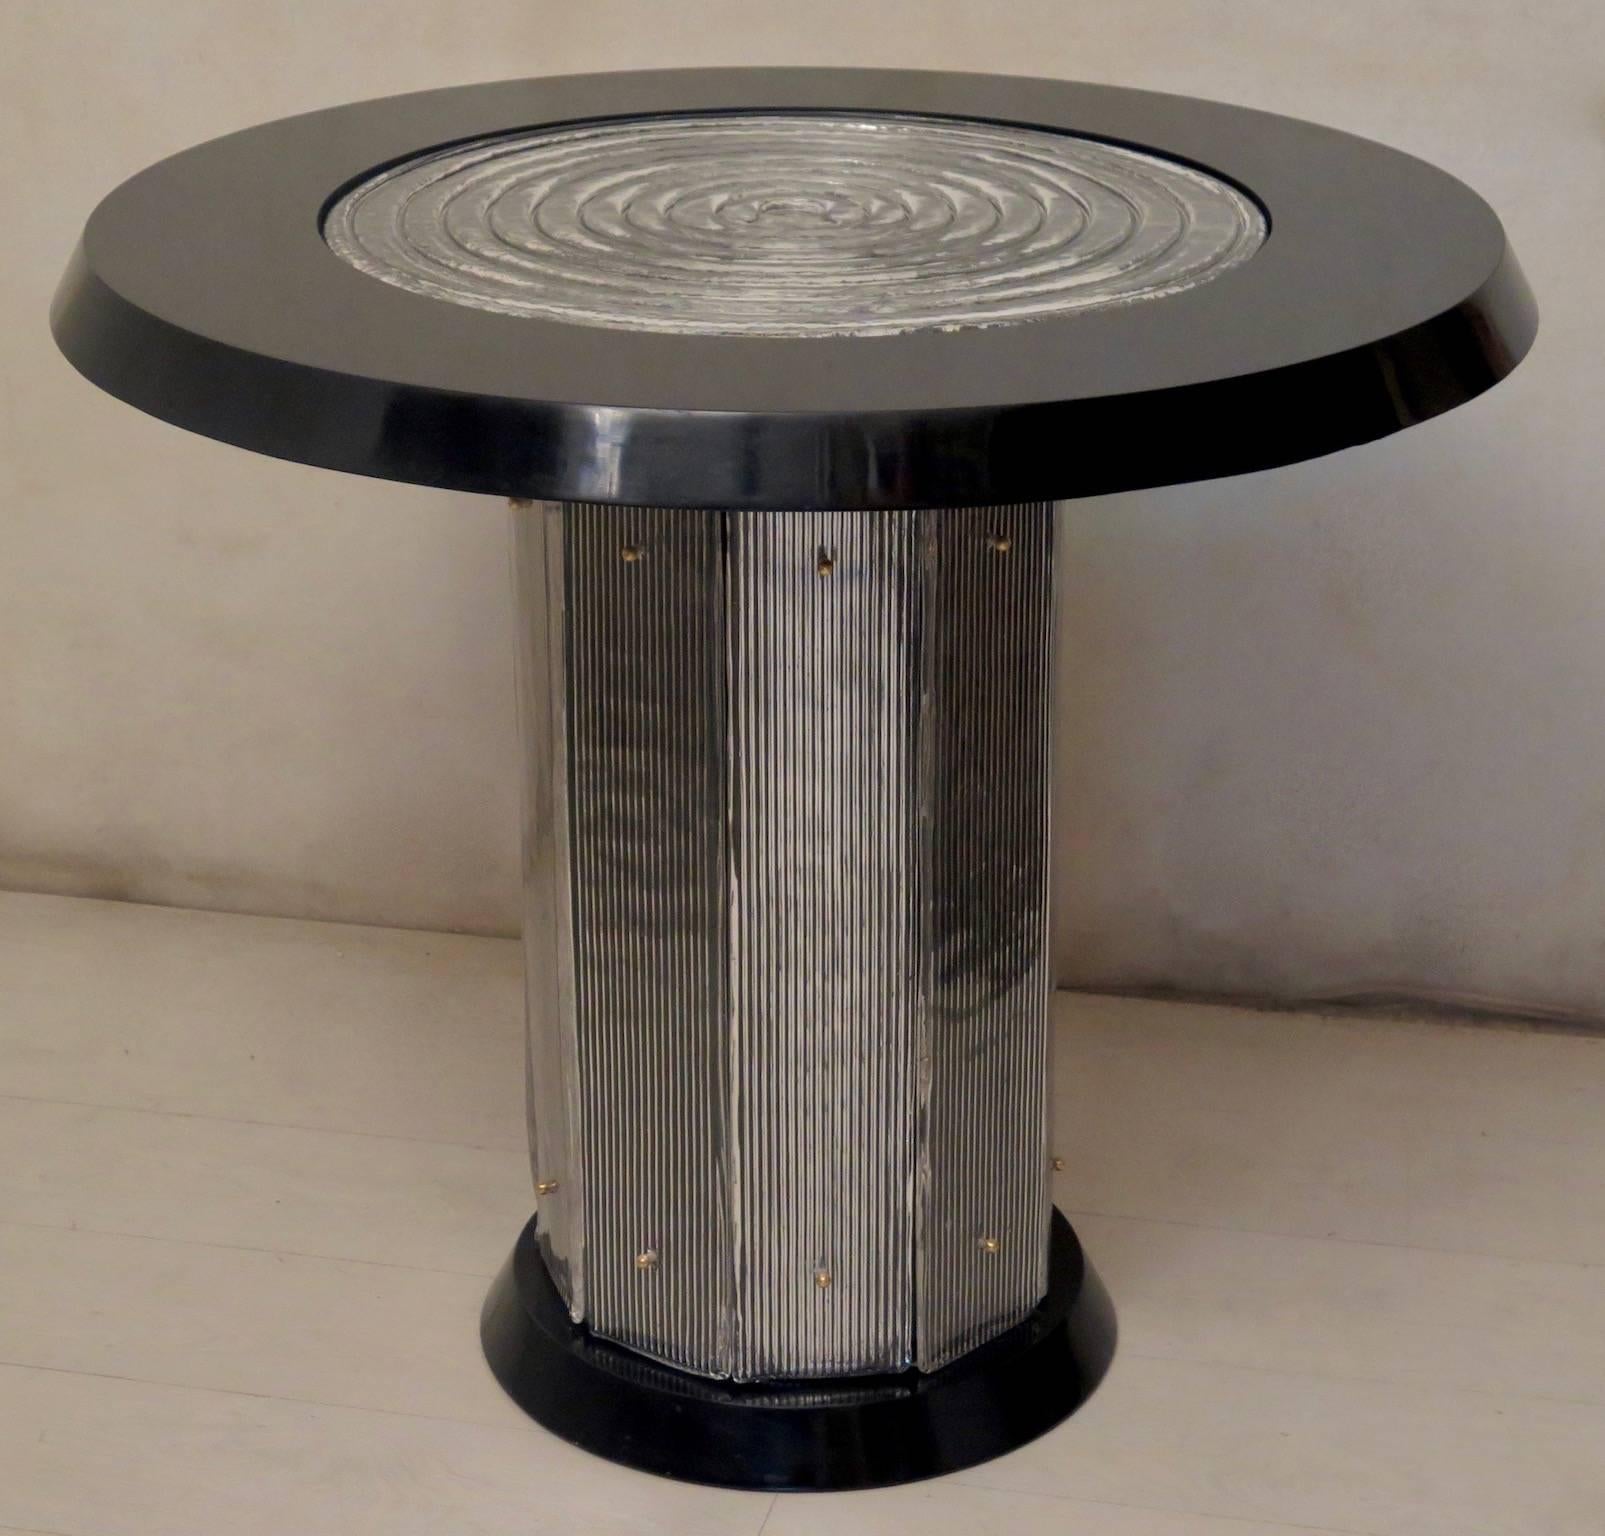 Italian Art Deco cards and tea table. Wooden structure polished in black lacquer; on the top there is a large Murano art glass disk, it is smaller in diameter than the entire top, so as to leave a frame all around the table. Finally, the plan has a